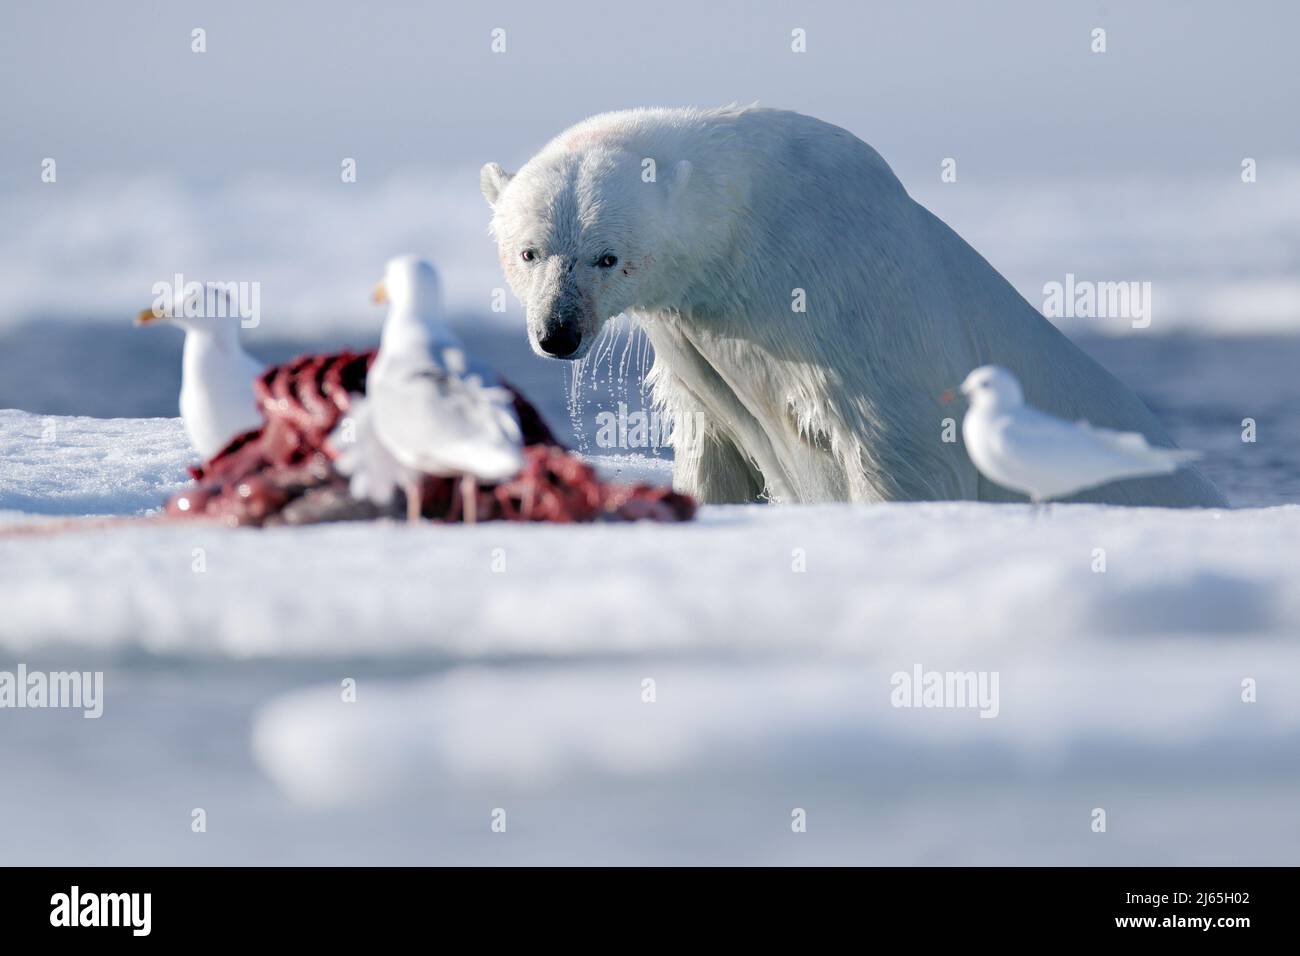 Surfacing dangerous polar bear in the ice with seal carcass Stock Photo